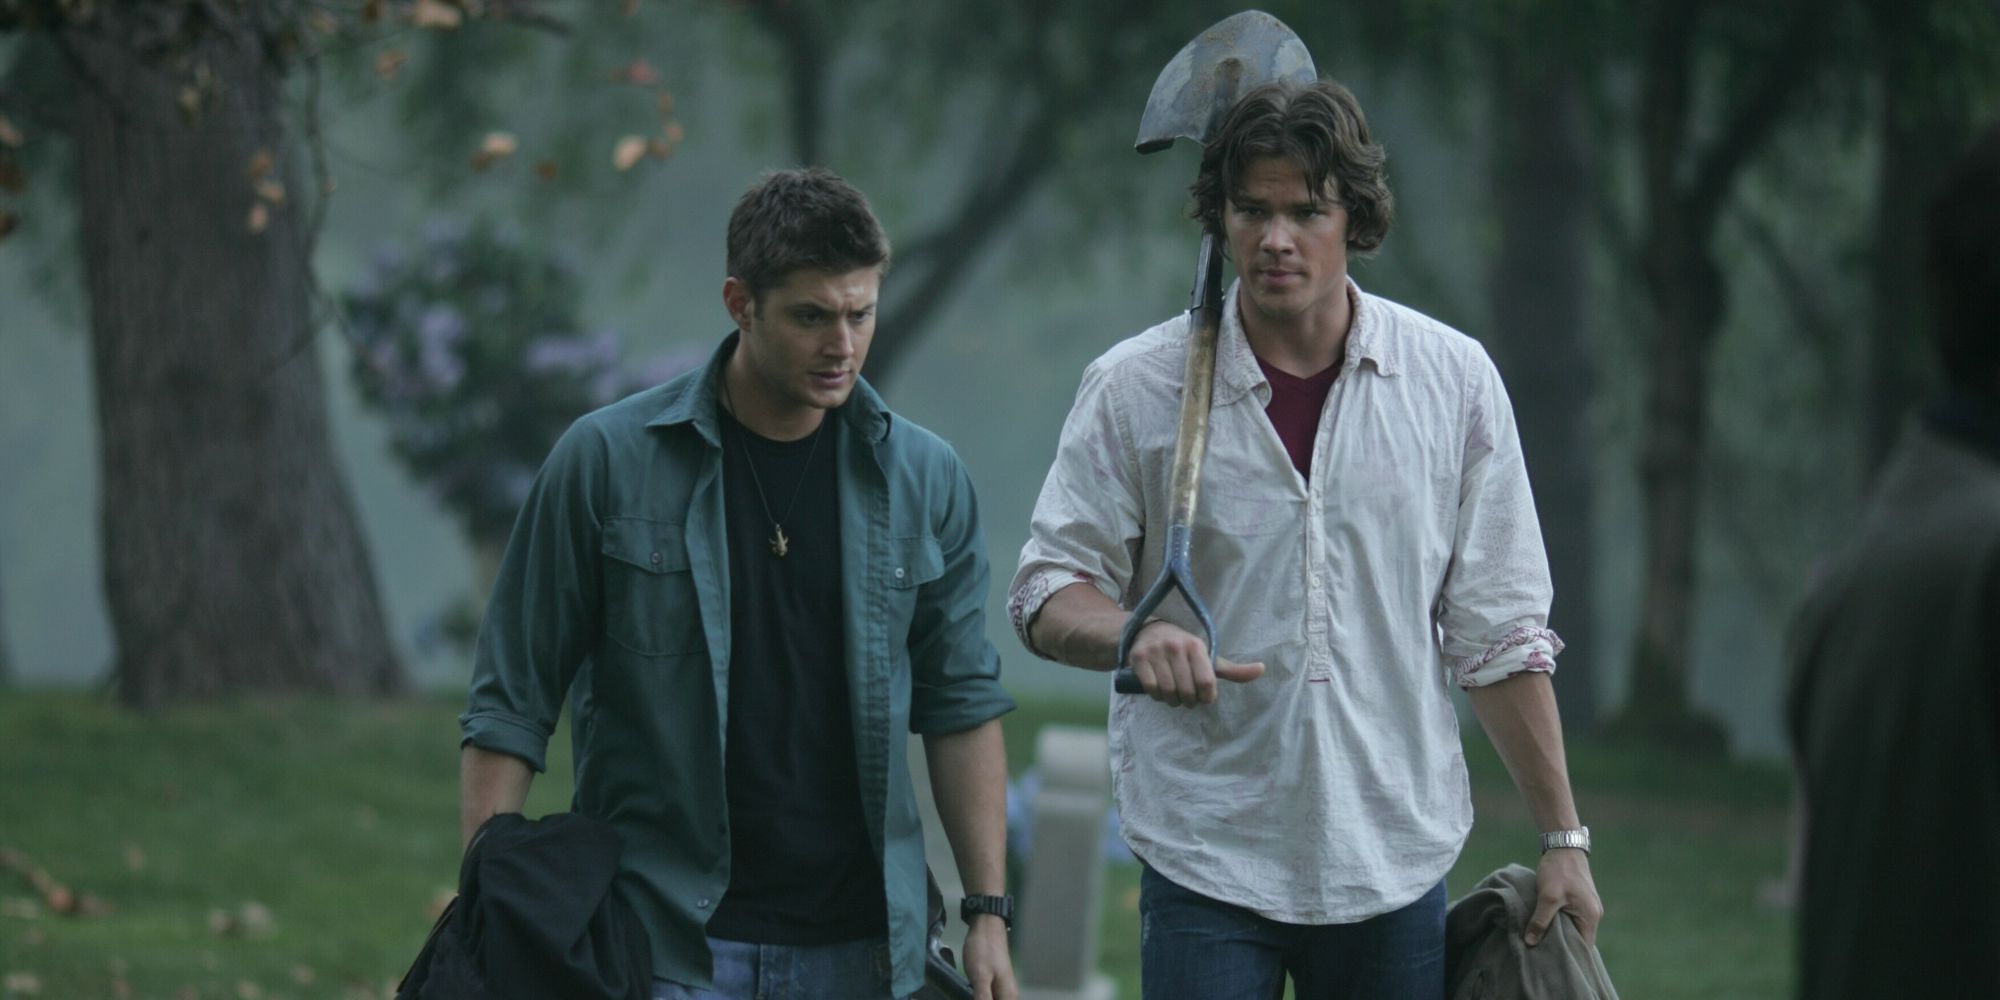 Image of Sam and Dean leaving a graveyard and talking